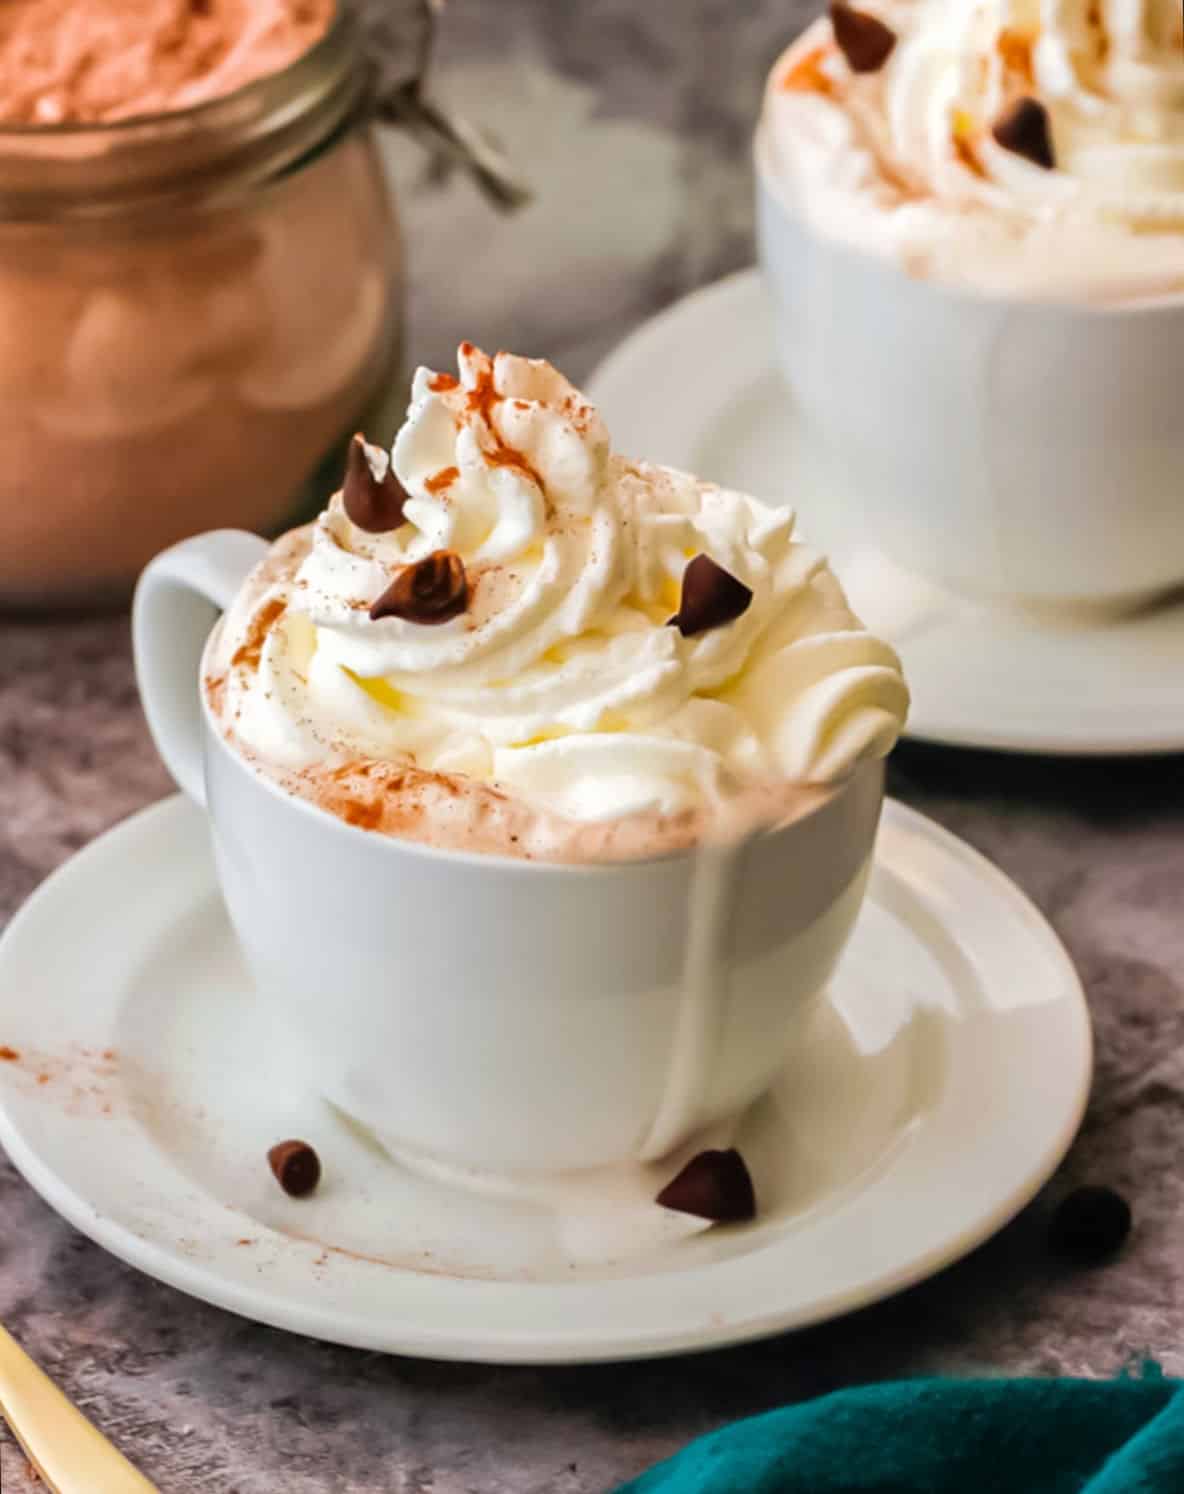 Hot chocolate with whipped cream in a white cup and saucer. Hot cocoa jar and cup in the background.